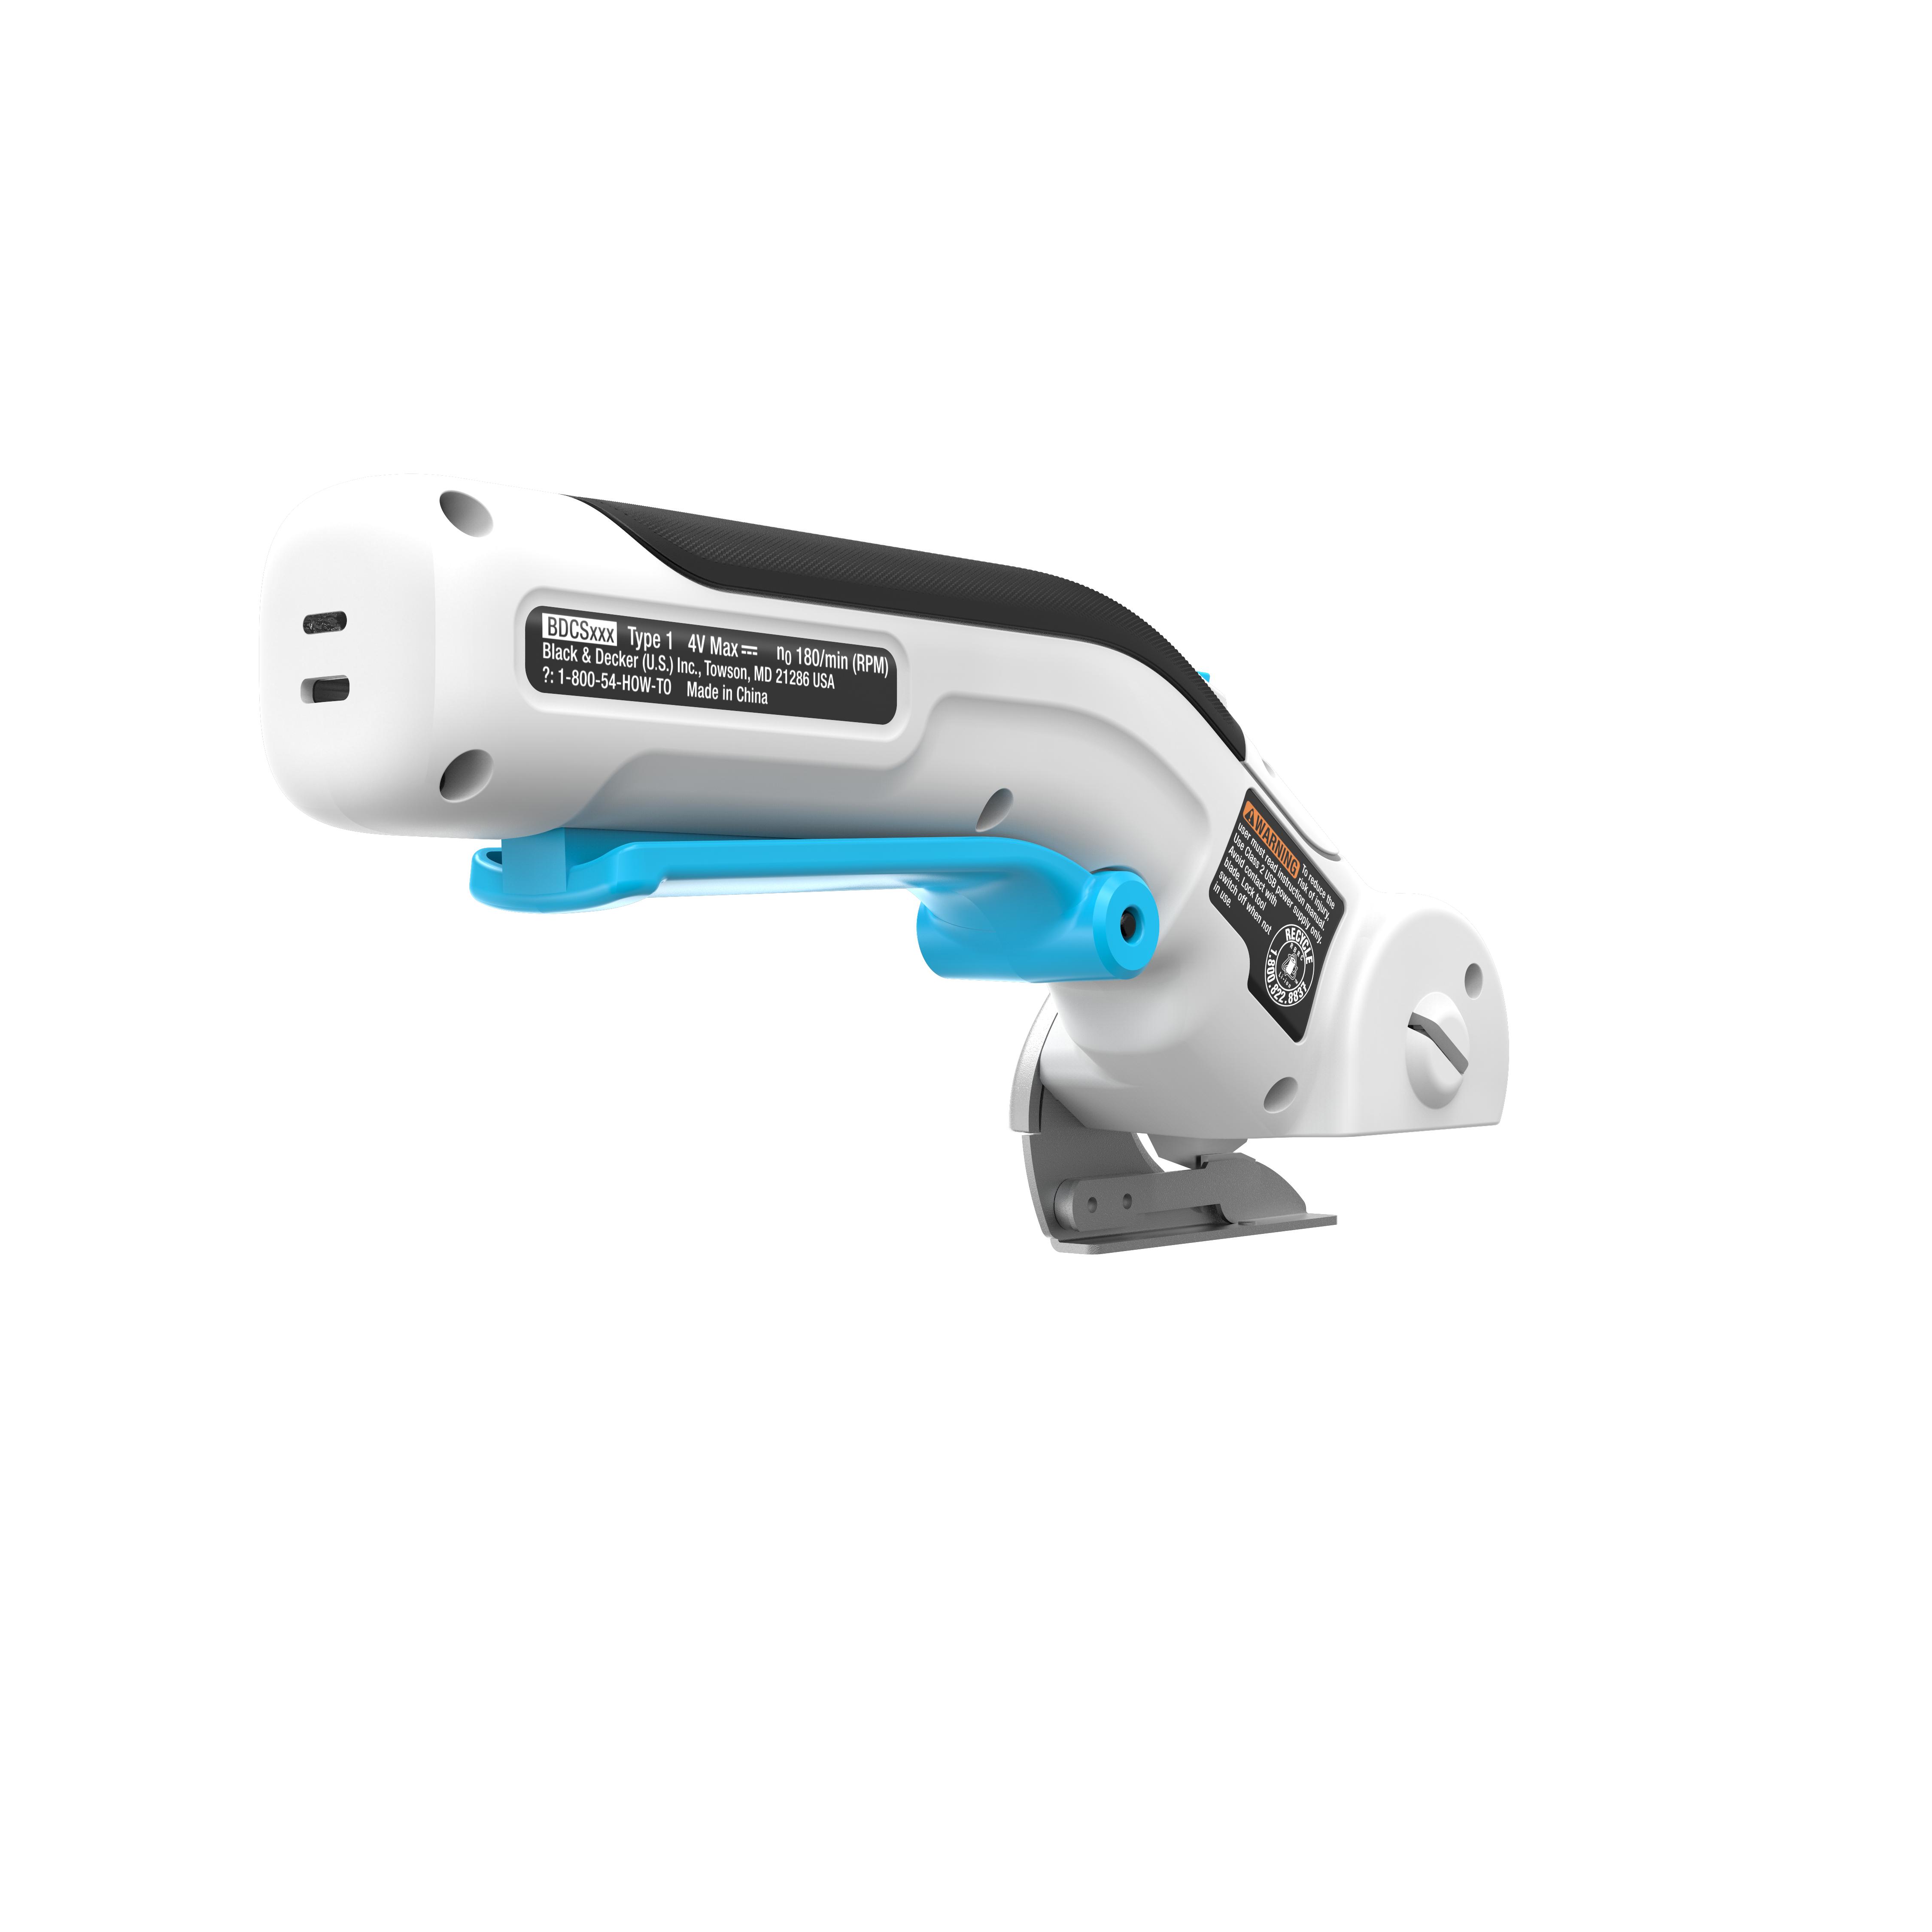 BLACK+DECKER 4V MAX Rotary Cutter, Cordless, USB Rechargeable (BCRC115FF),  White